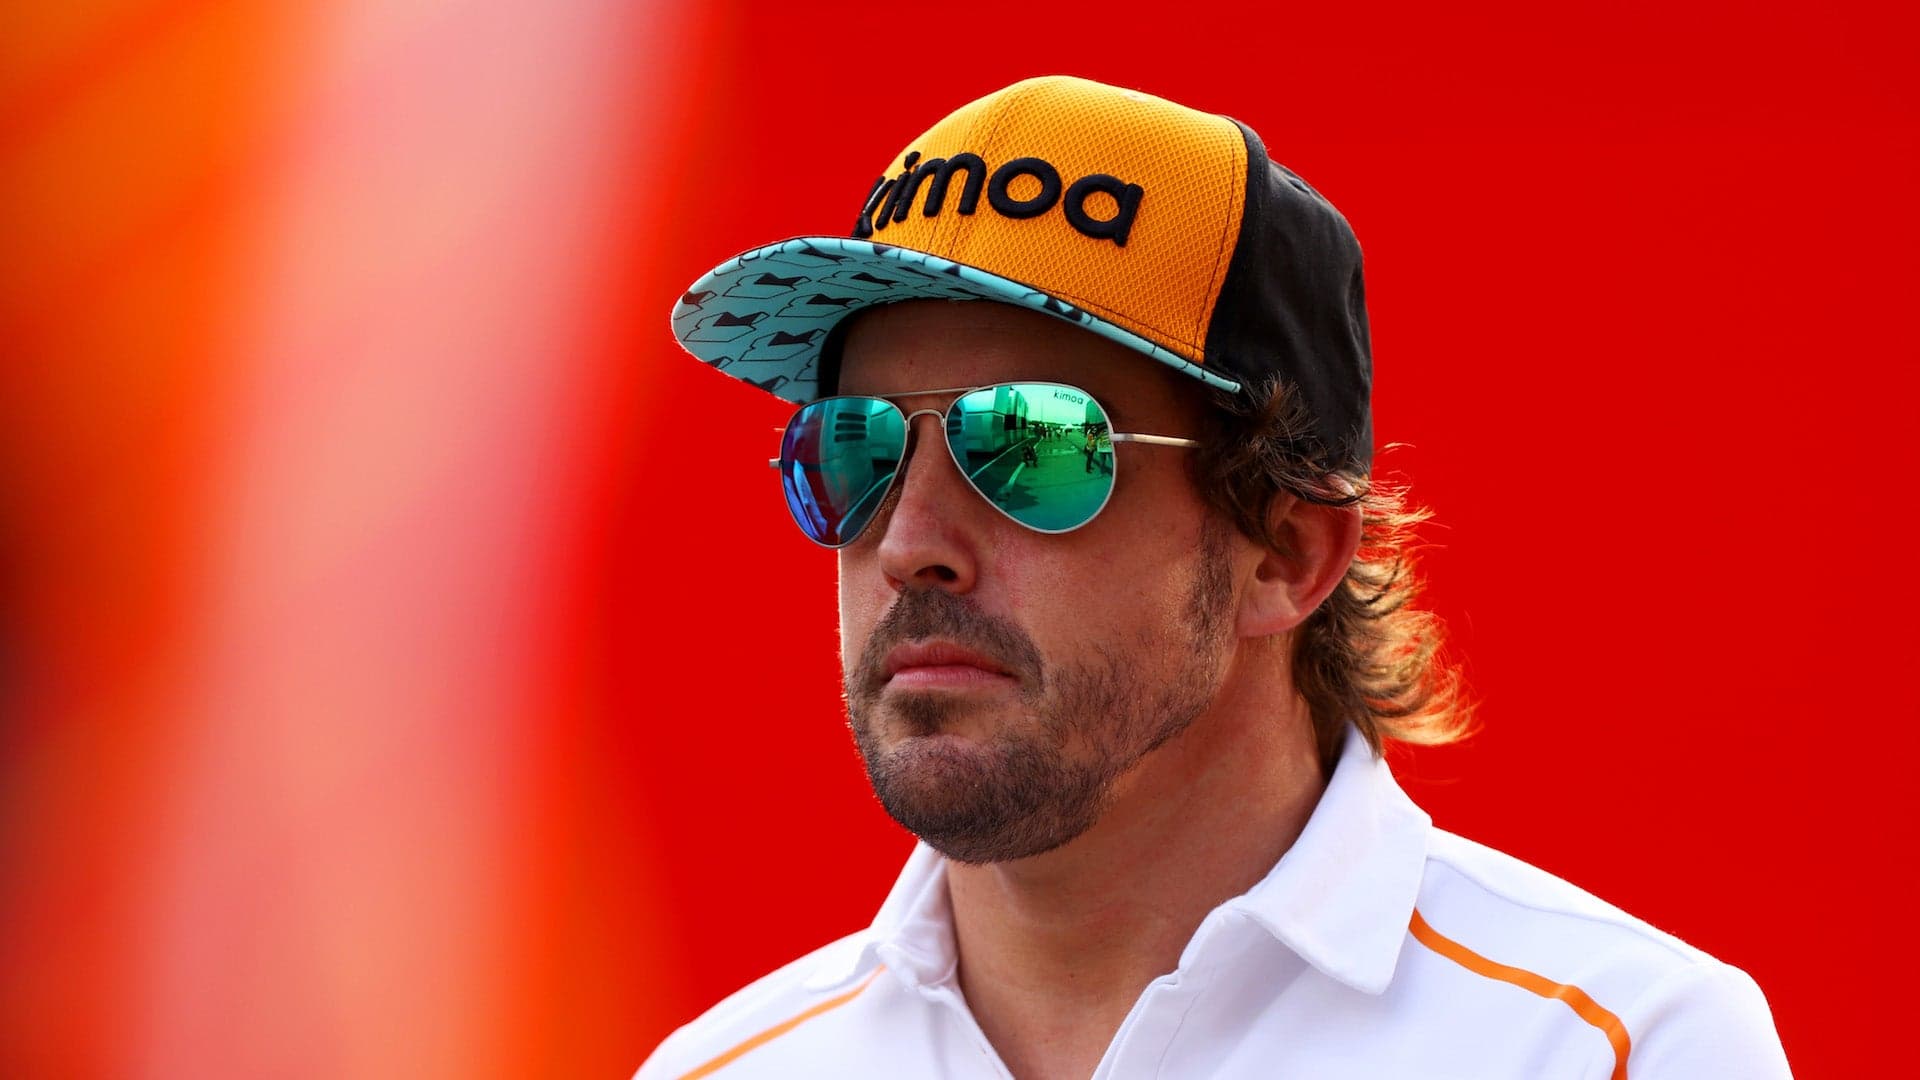 McLaren Officially Returning to 2019 Indianapolis 500 With Fernando Alonso Behind the Wheel